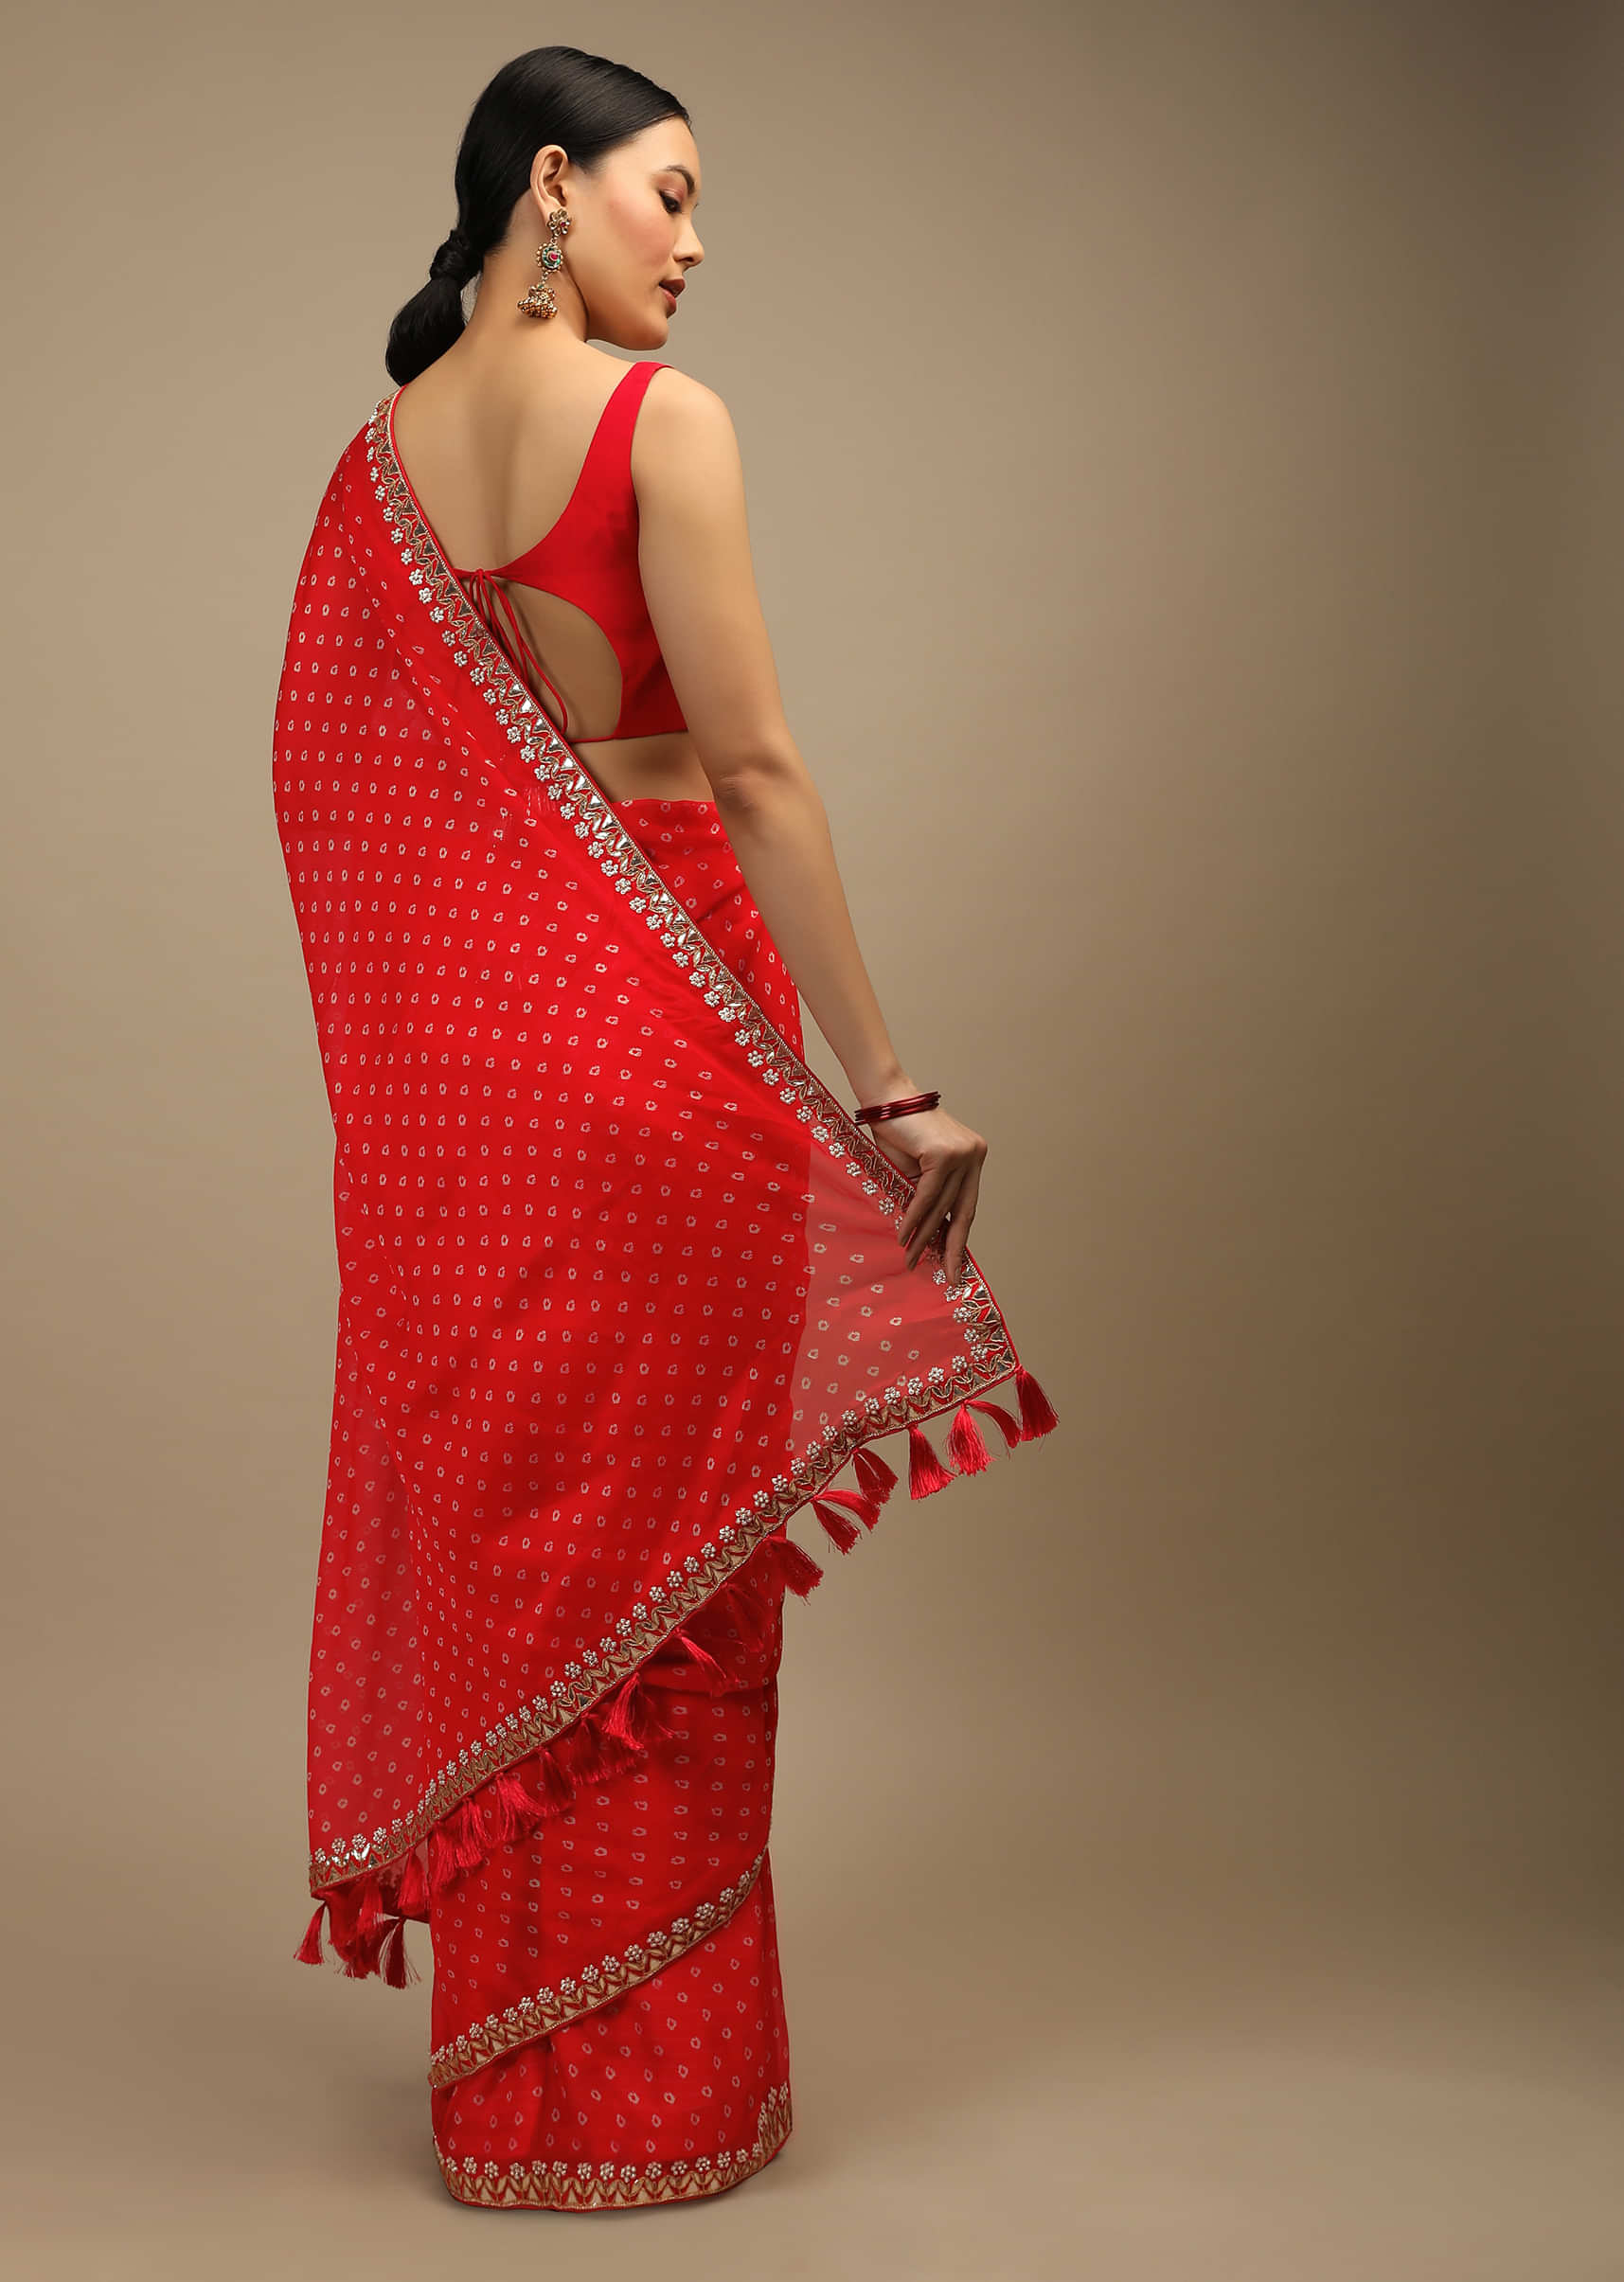 Coral Red Saree In Organza With Bandhani Buttis And Gotta Patti Embroidered Floral Motifs On The Border  